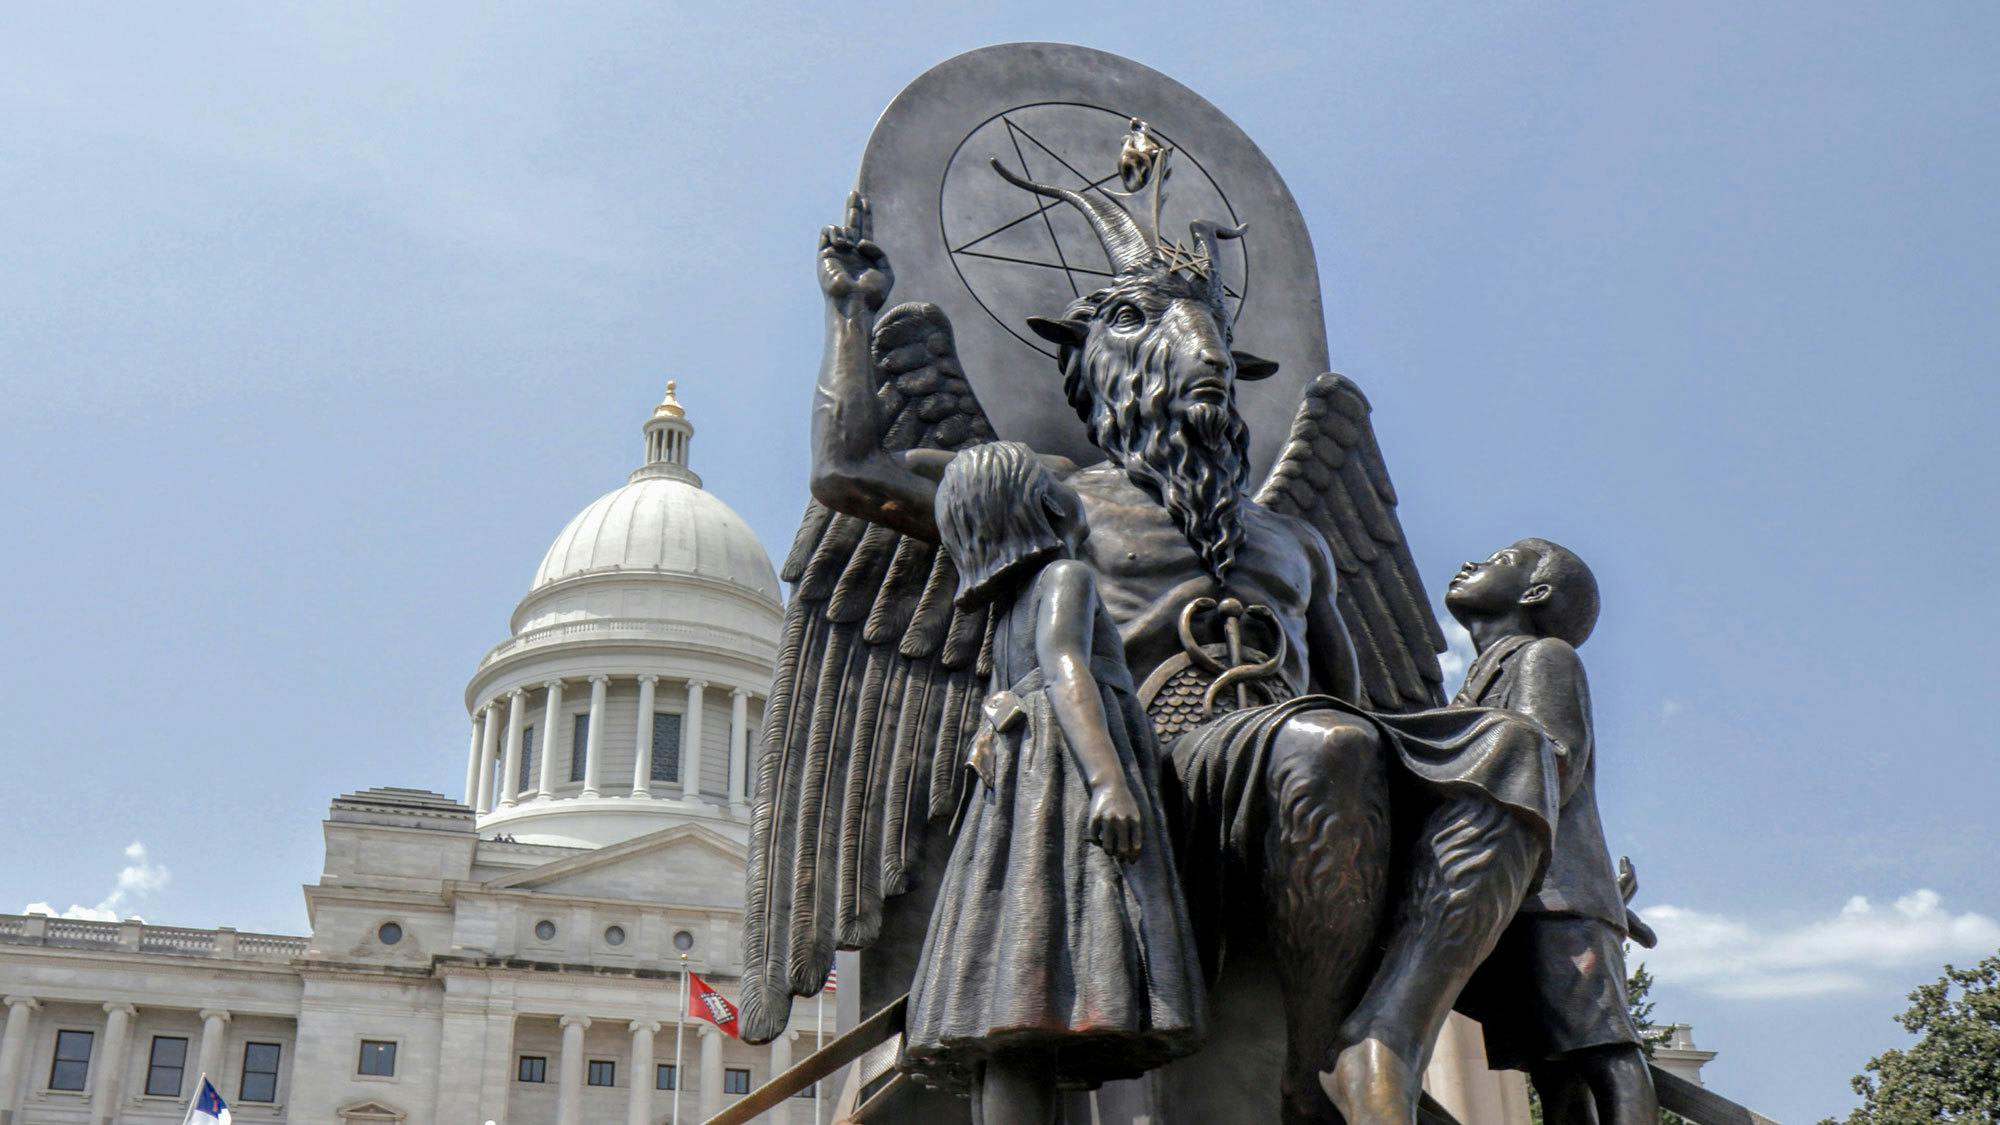 American Airlines Demands That Woman In 'Hail Satan' Shirt Change Or Get Off The Plane